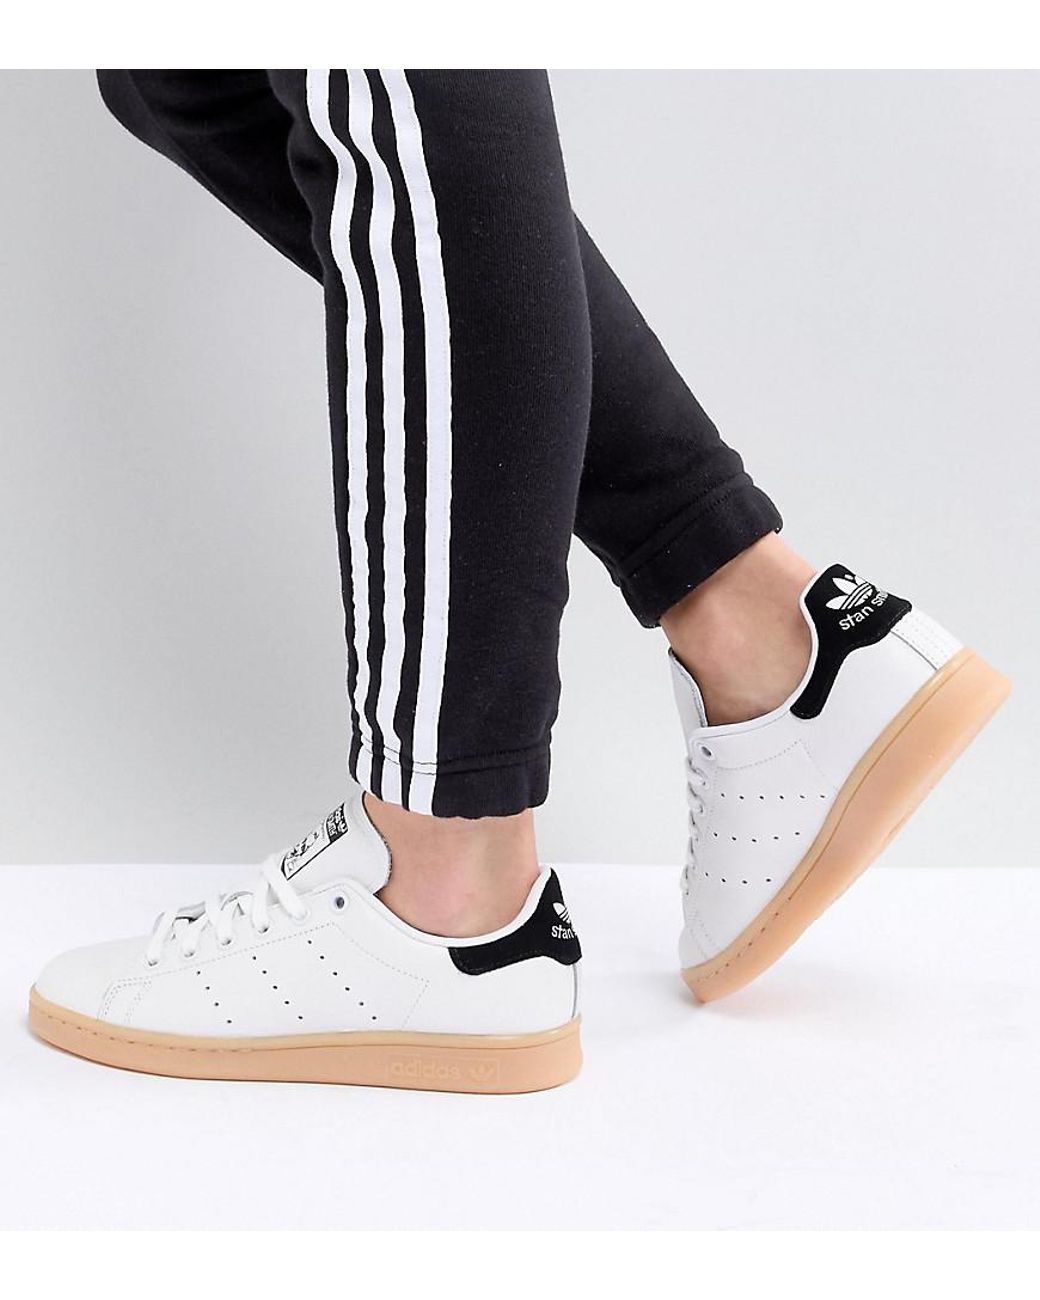 adidas Originals Stan Smith Sneakers In Off White With Gum Sole in Gray |  Lyst